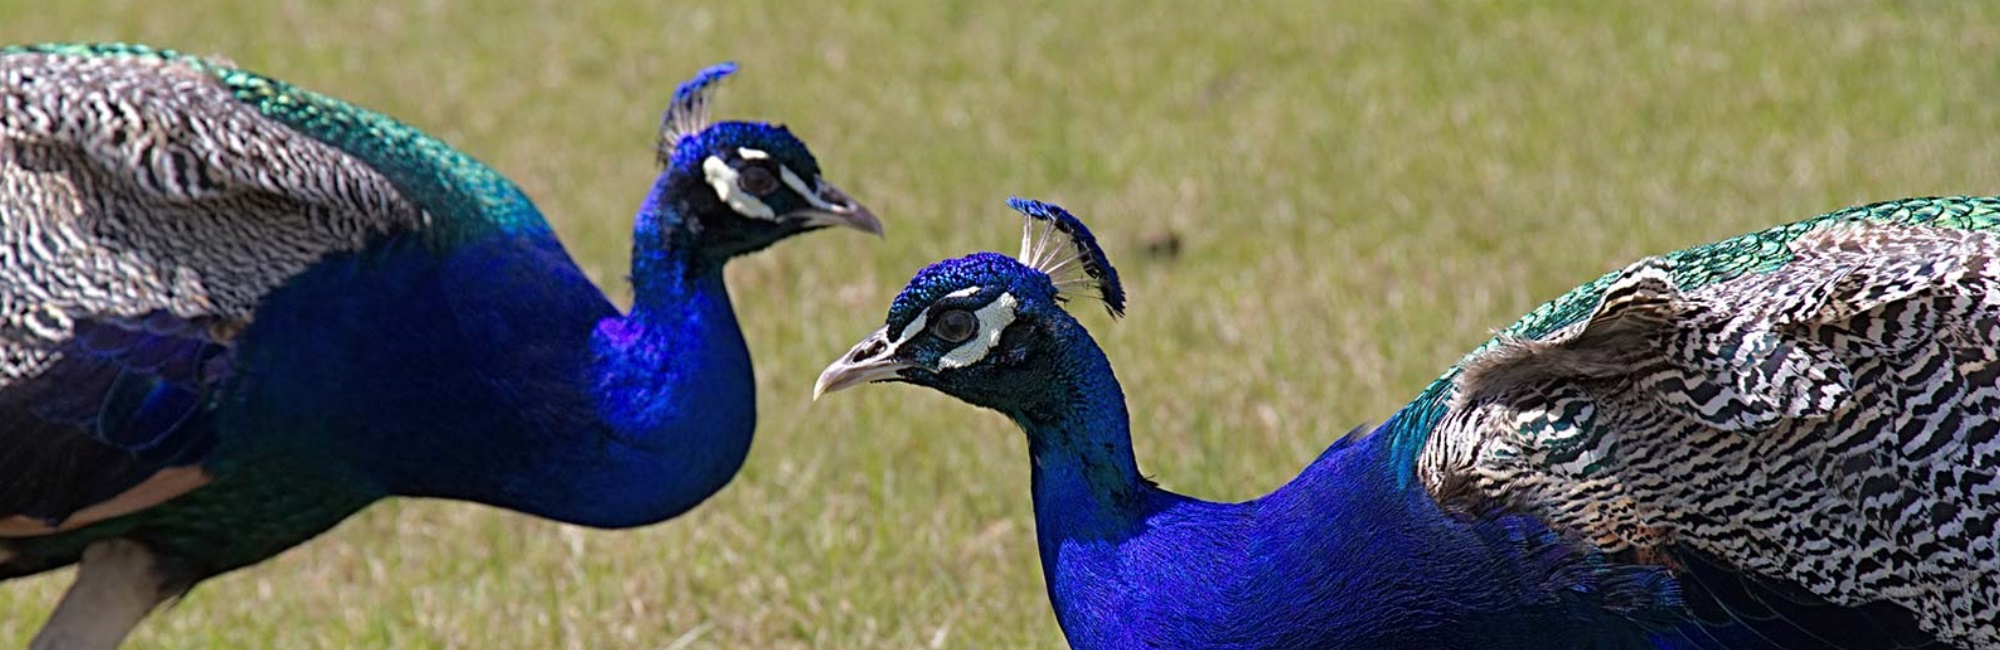 Peacocks together in field